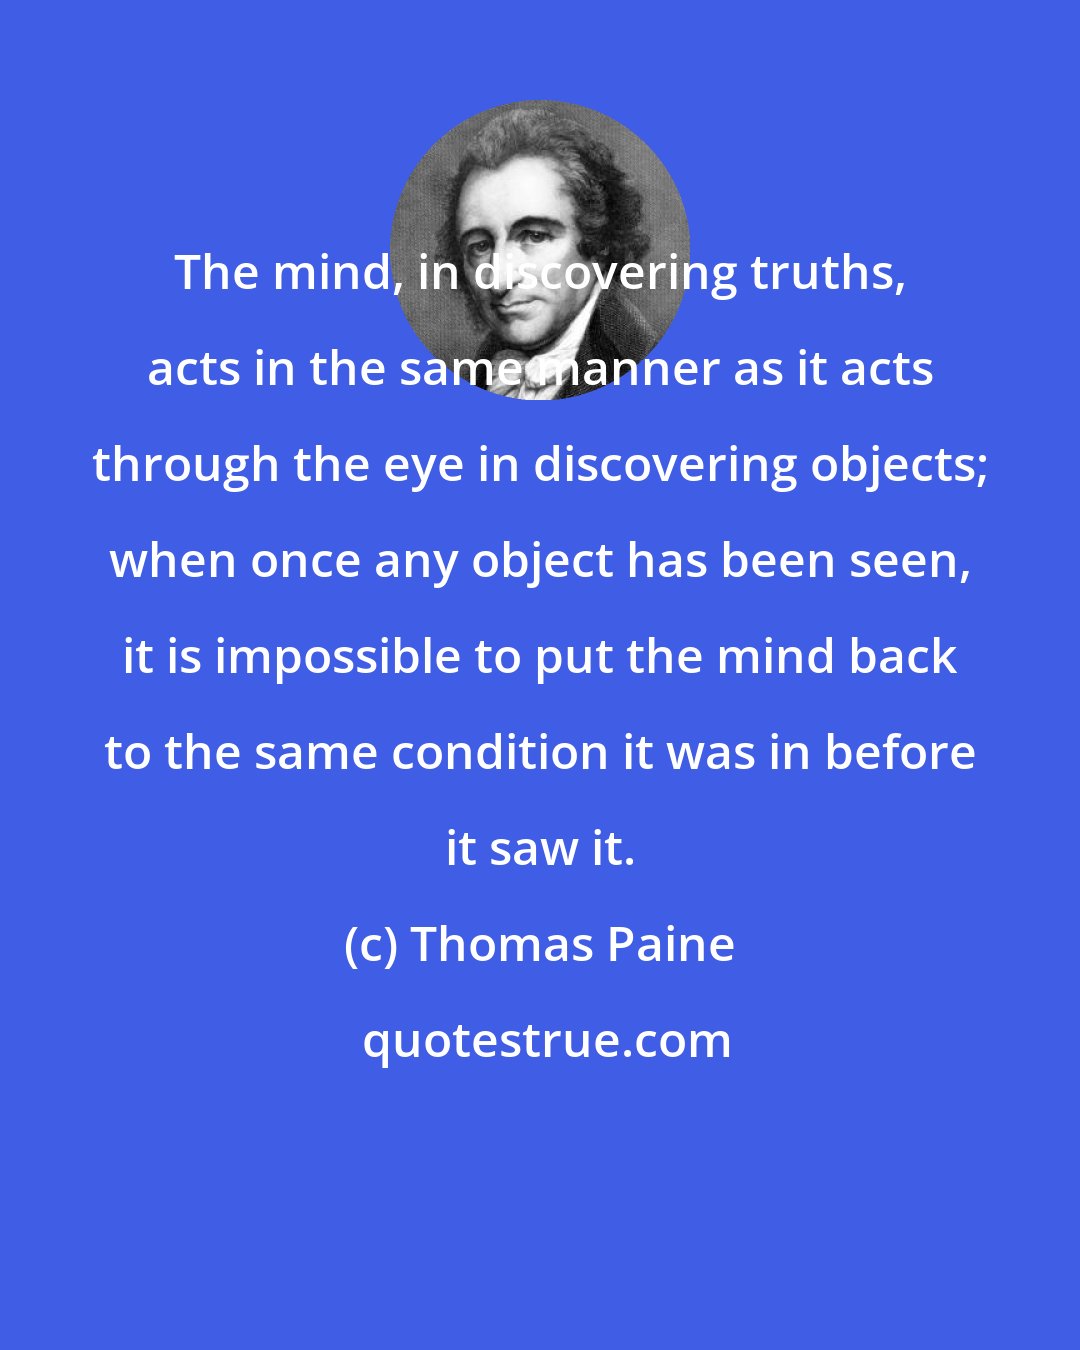 Thomas Paine: The mind, in discovering truths, acts in the same manner as it acts through the eye in discovering objects; when once any object has been seen, it is impossible to put the mind back to the same condition it was in before it saw it.